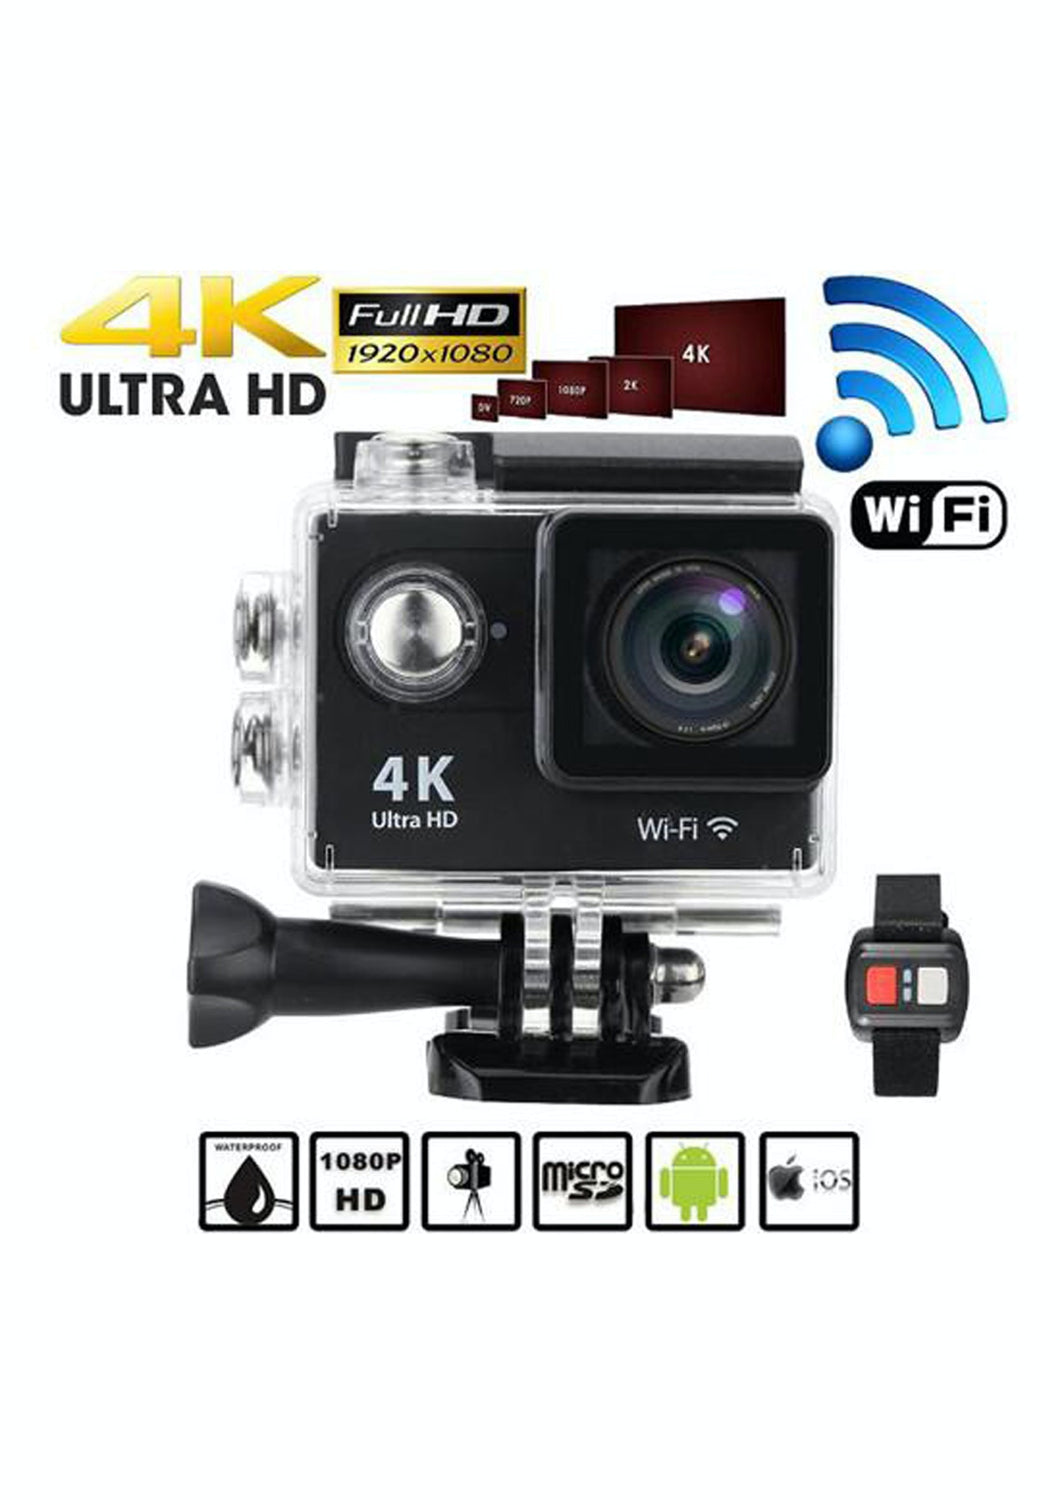 HD SPORTS CAMERA WITH WIFI & REMOTE WATCH, WATERPROOF HOUSEING & MOUNTS